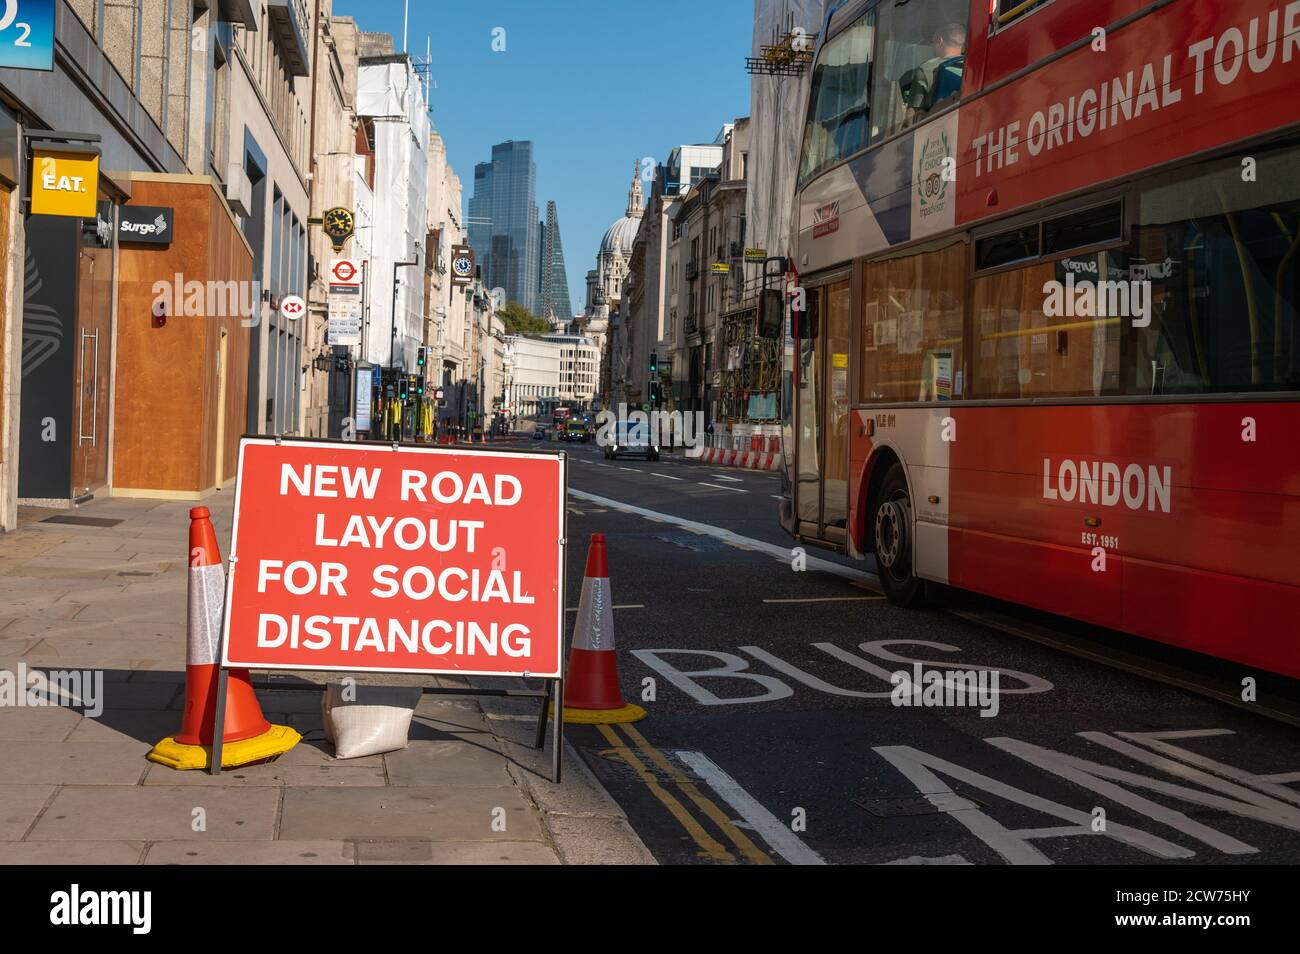 LONDON - SEPTEMBER 13, 2020: Social Distancing new road layouts sign with a London Double Decker Bus passing and St Paul's Cathedral in the background Stock Photo